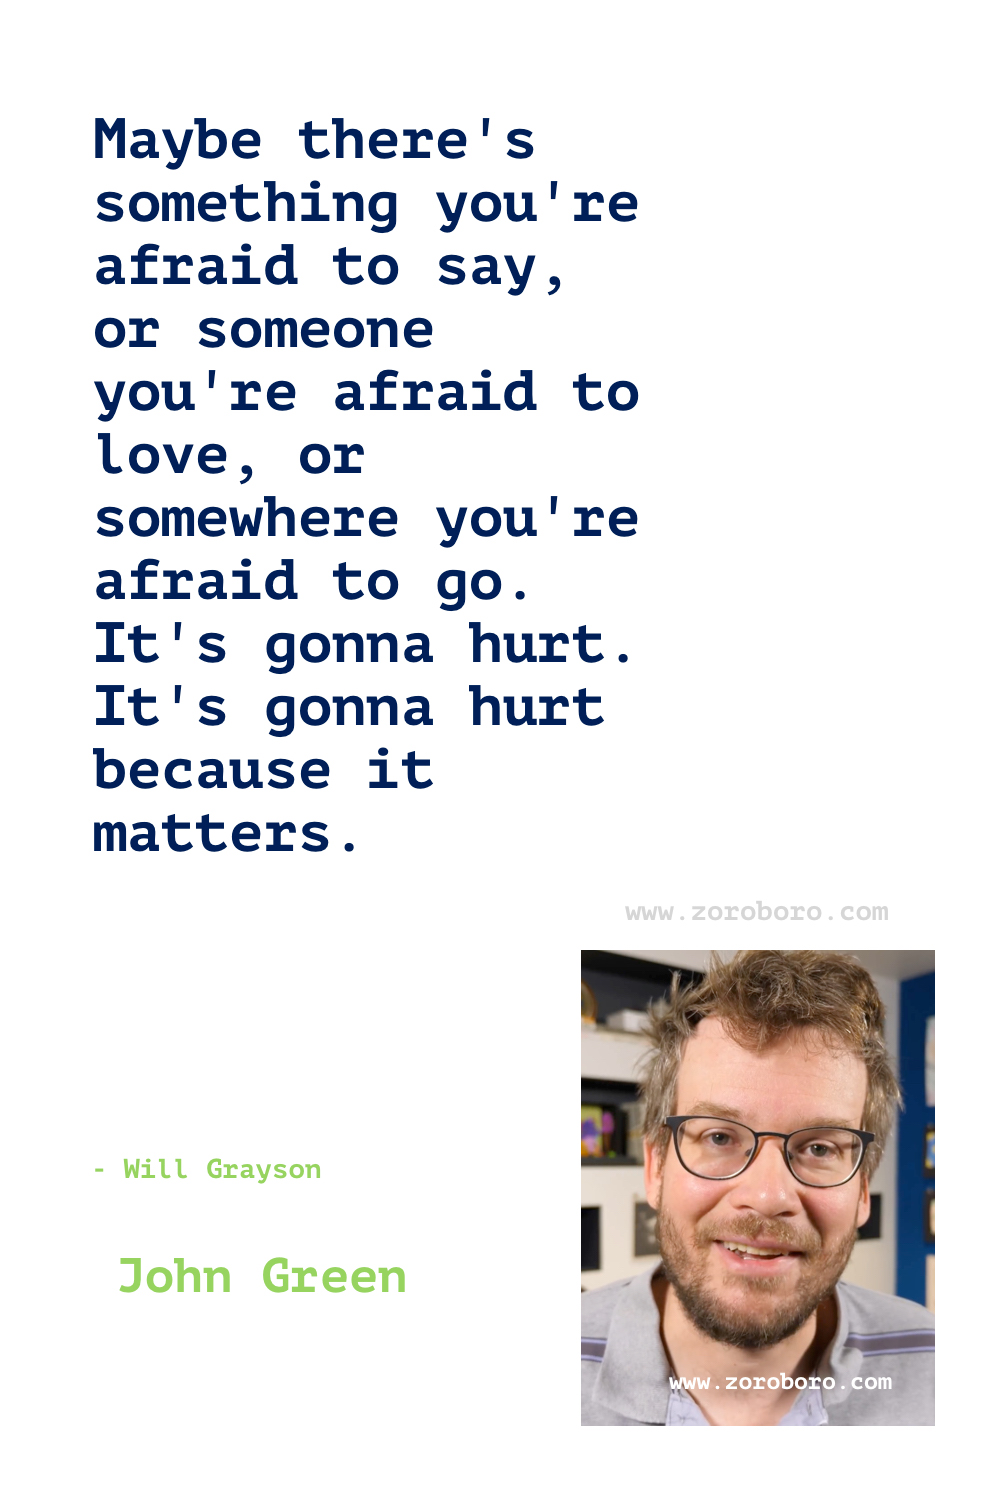 John Green Quotes, John Green Books Quotes, John Green The Fault in Our Stars, John Green Looking for Alaska, John Green Paper Towns & John Green Turtles All the Way Down Quotes, John Green Quotes.